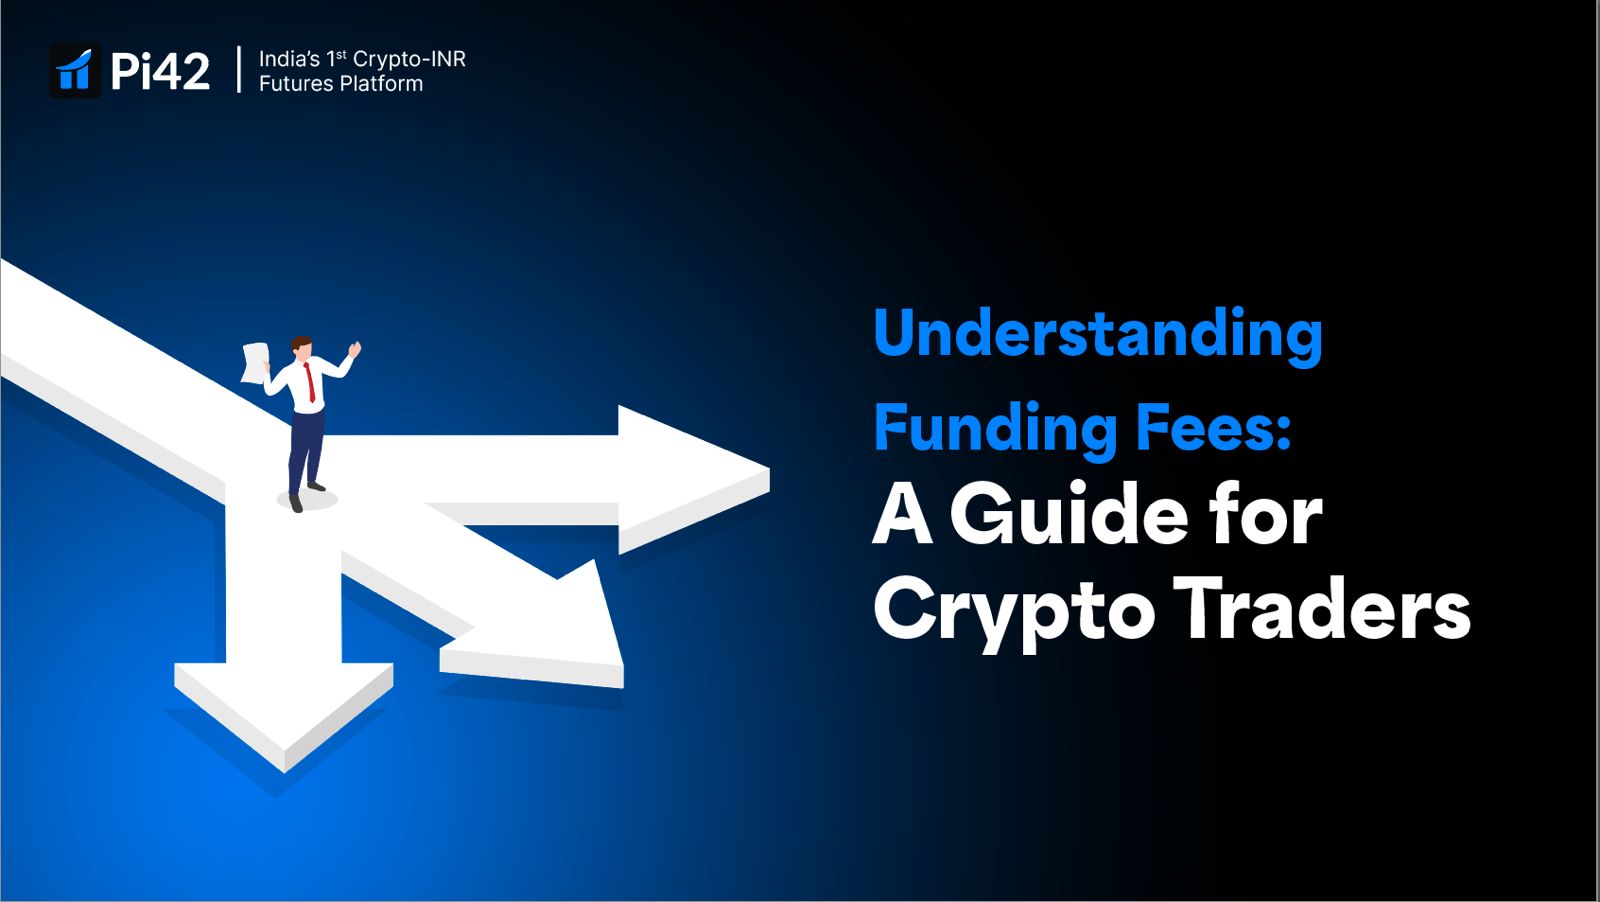 Understanding Funding Fees: A Guide for Crypto Traders